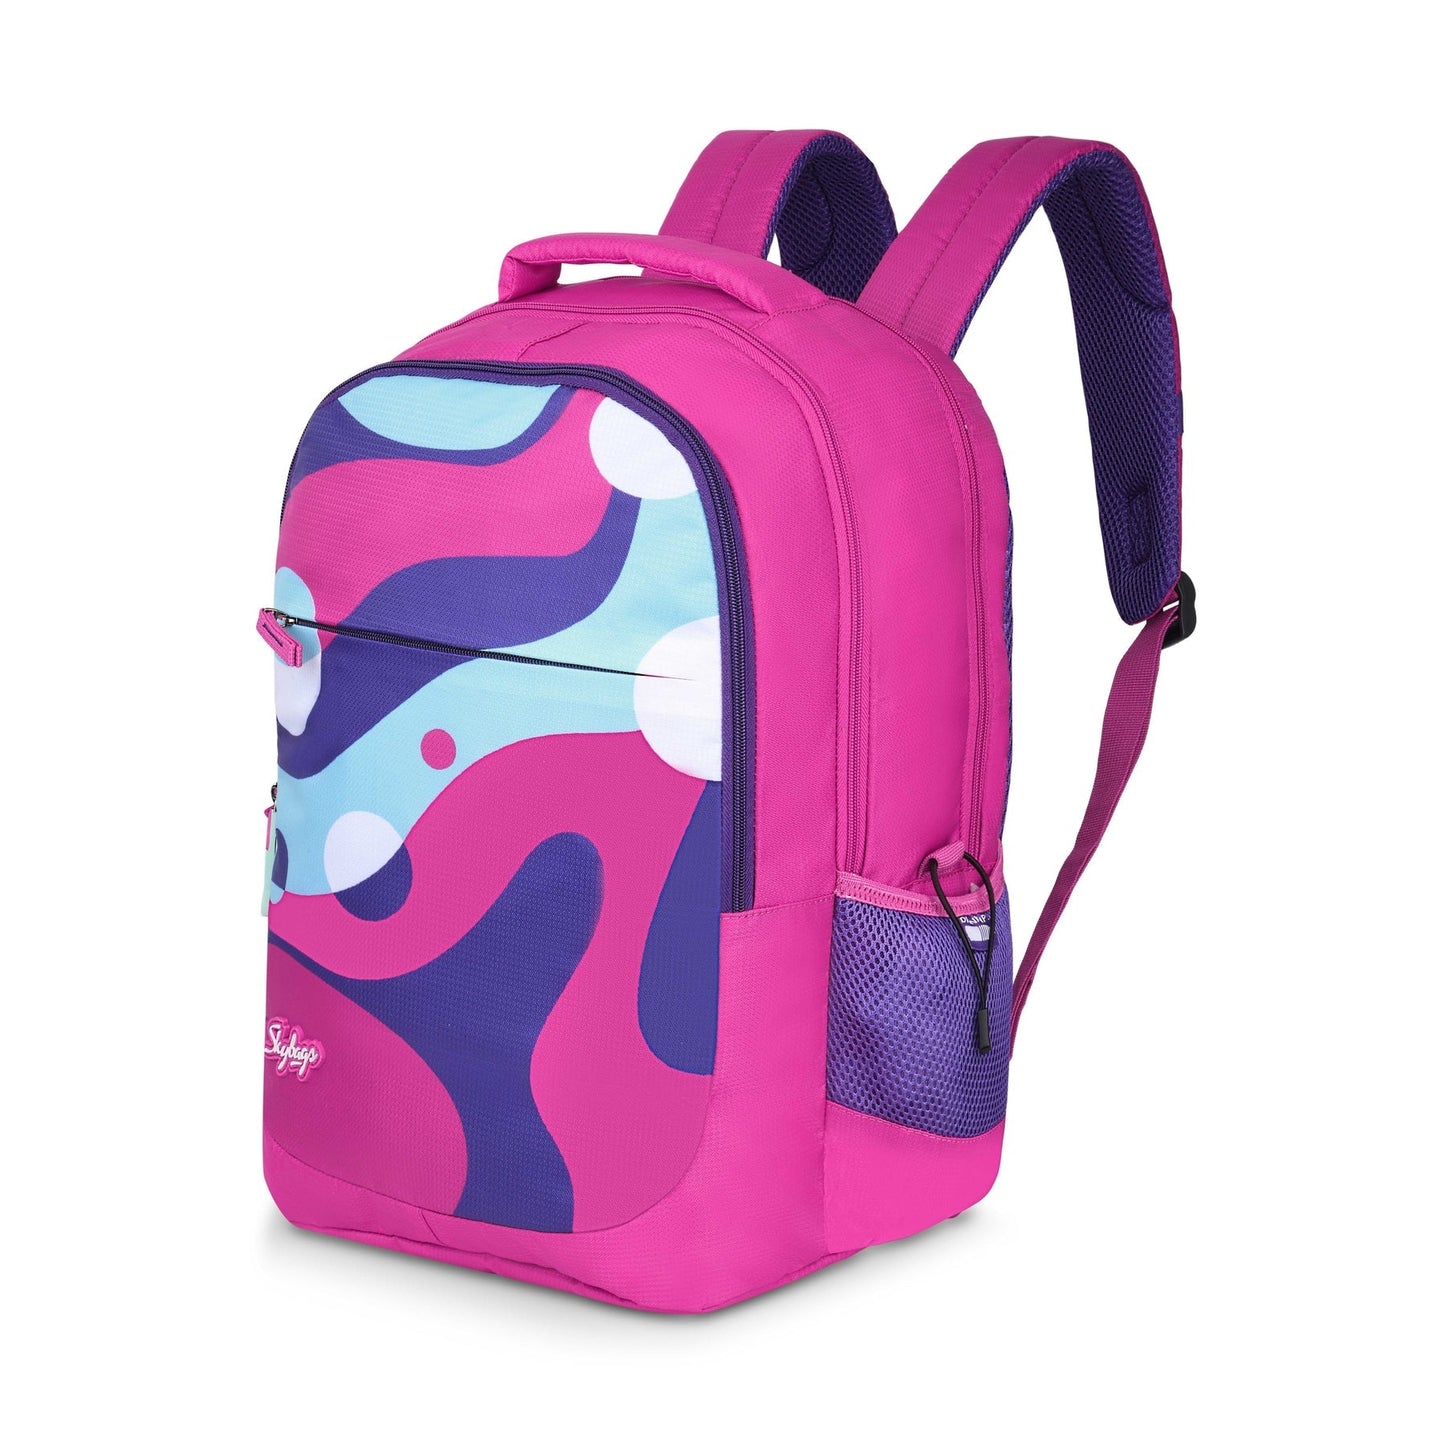 Skybags Squad 03 38L Backpack